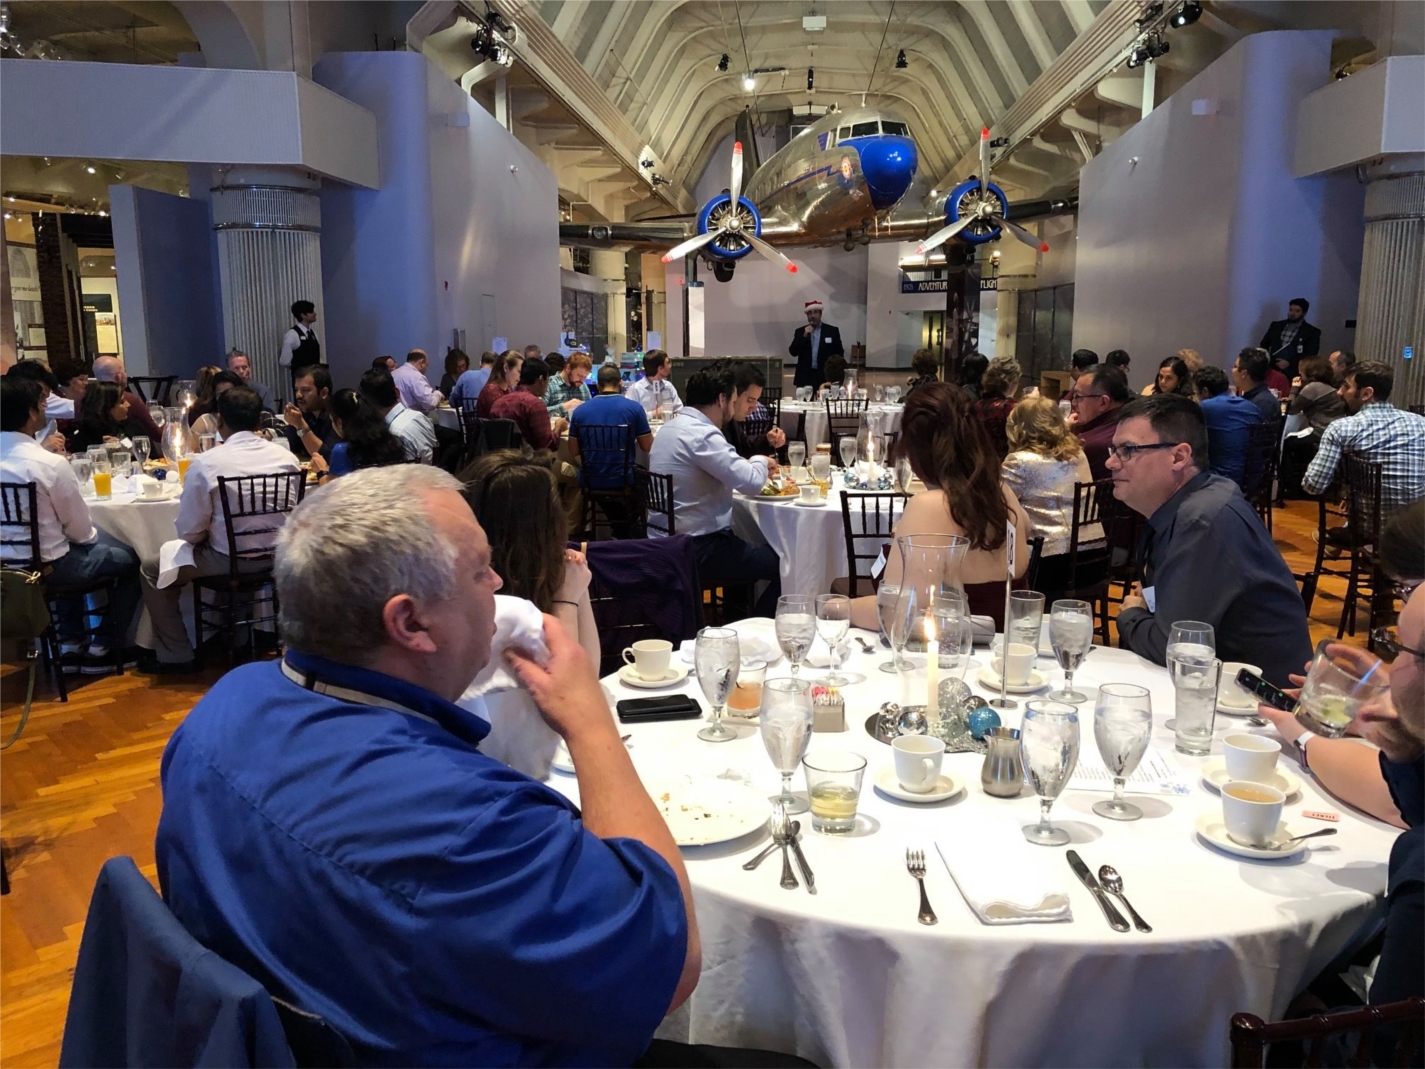 ESG's 2019 Holiday Party at The Henry Ford Museum